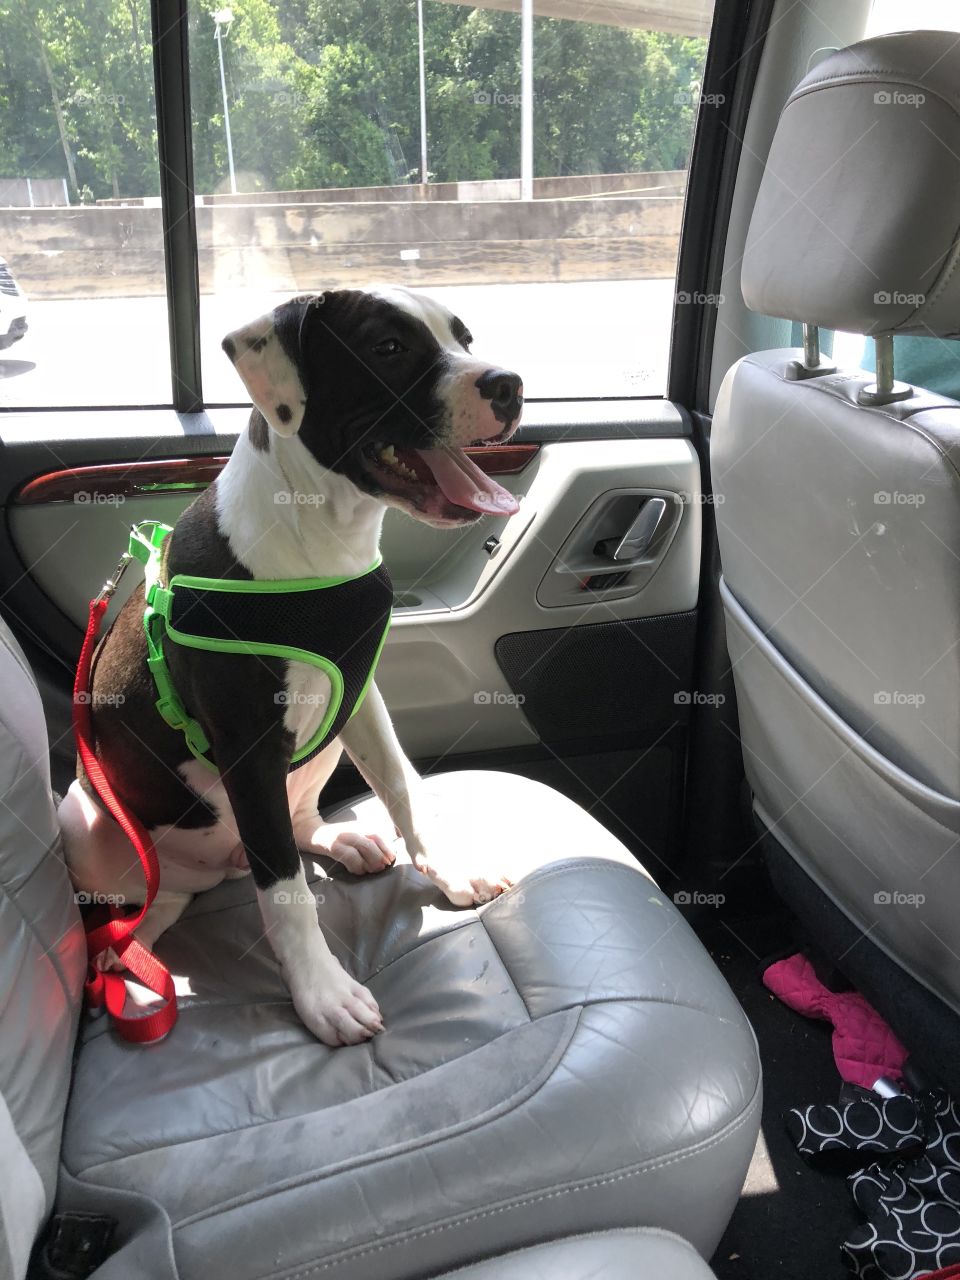 Barley is geared up for his first adventure. We are on our way to the Beltline in ATL. He is finally getting the hang of sitting still in his seat!